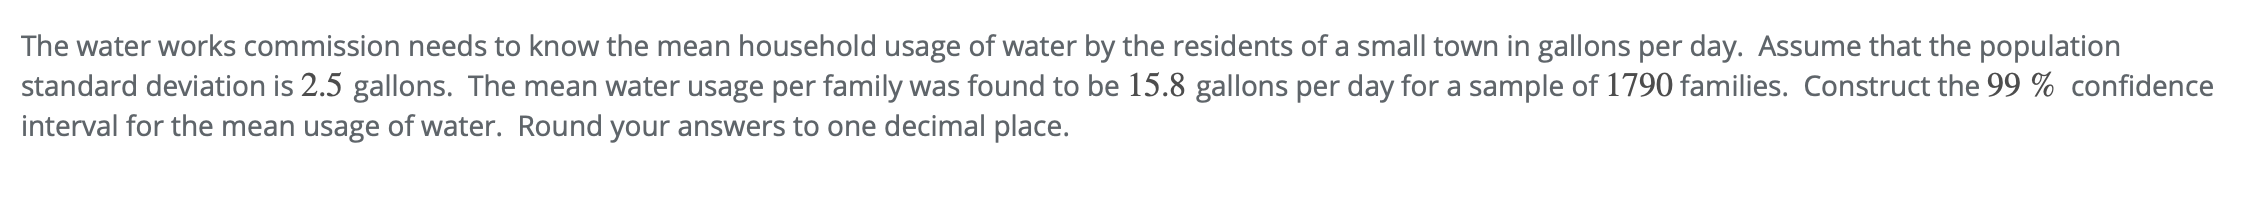 The Water Works Commission Needs To Know The Mean Household Usage Of Water By The Residents Of A Small Town In Gallons P 1